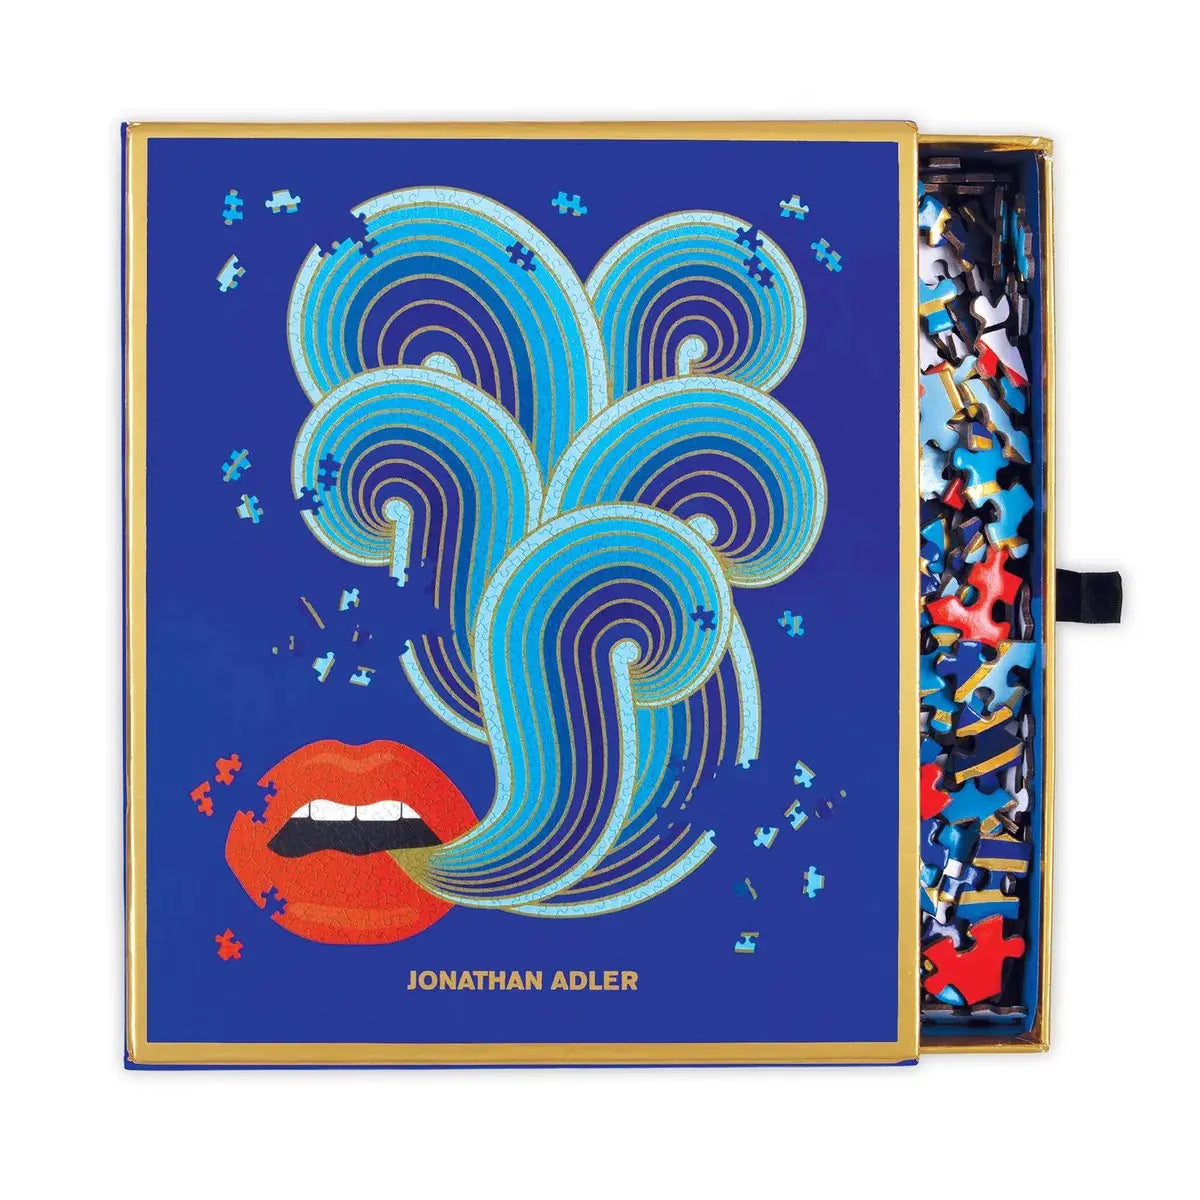 Jonathan Adler Shaped Lips Puzzle Shaped box with puzzle pieces